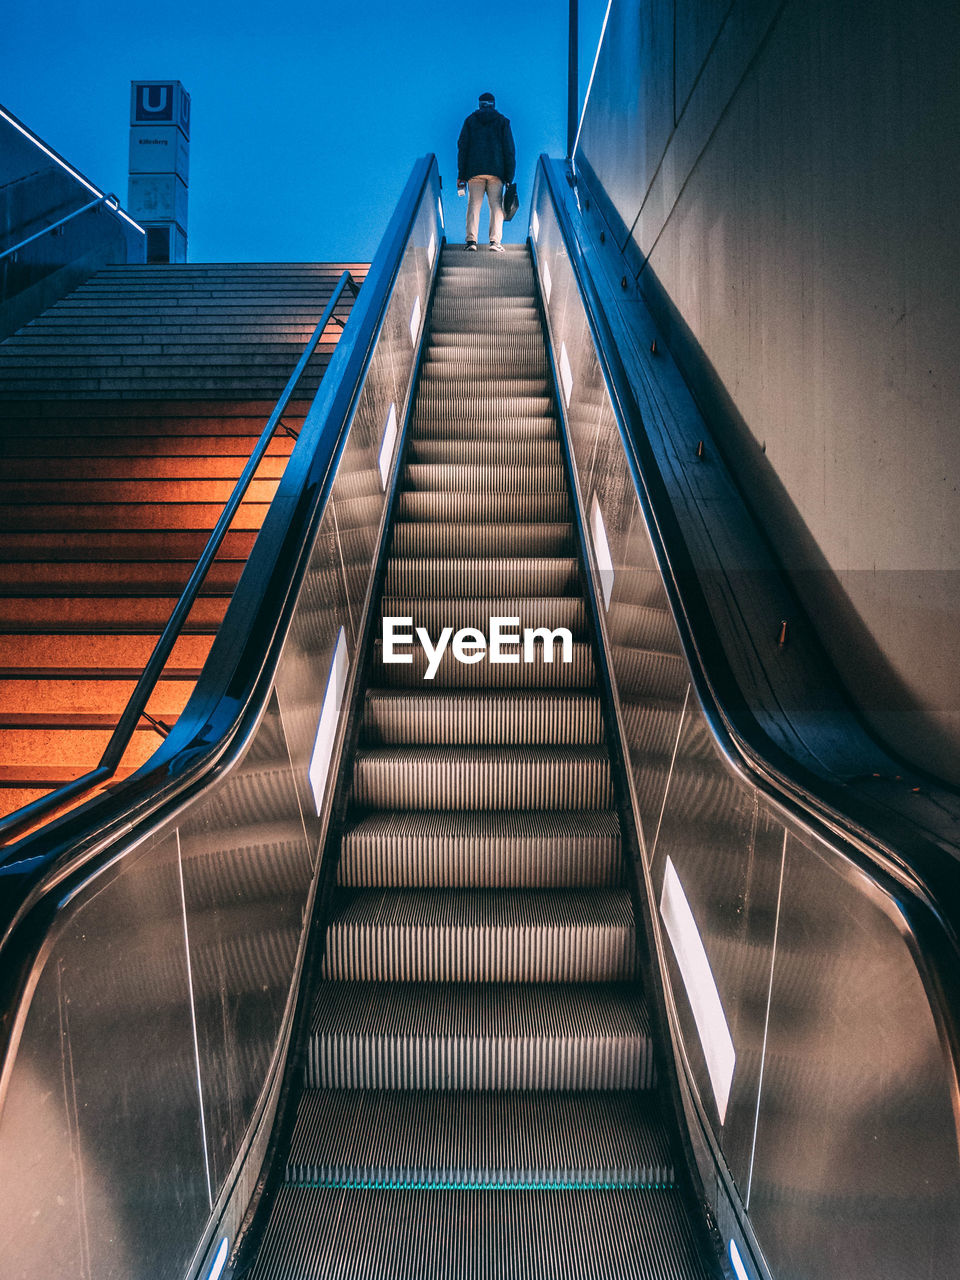 Low angle view of man standing on escalator at dusk